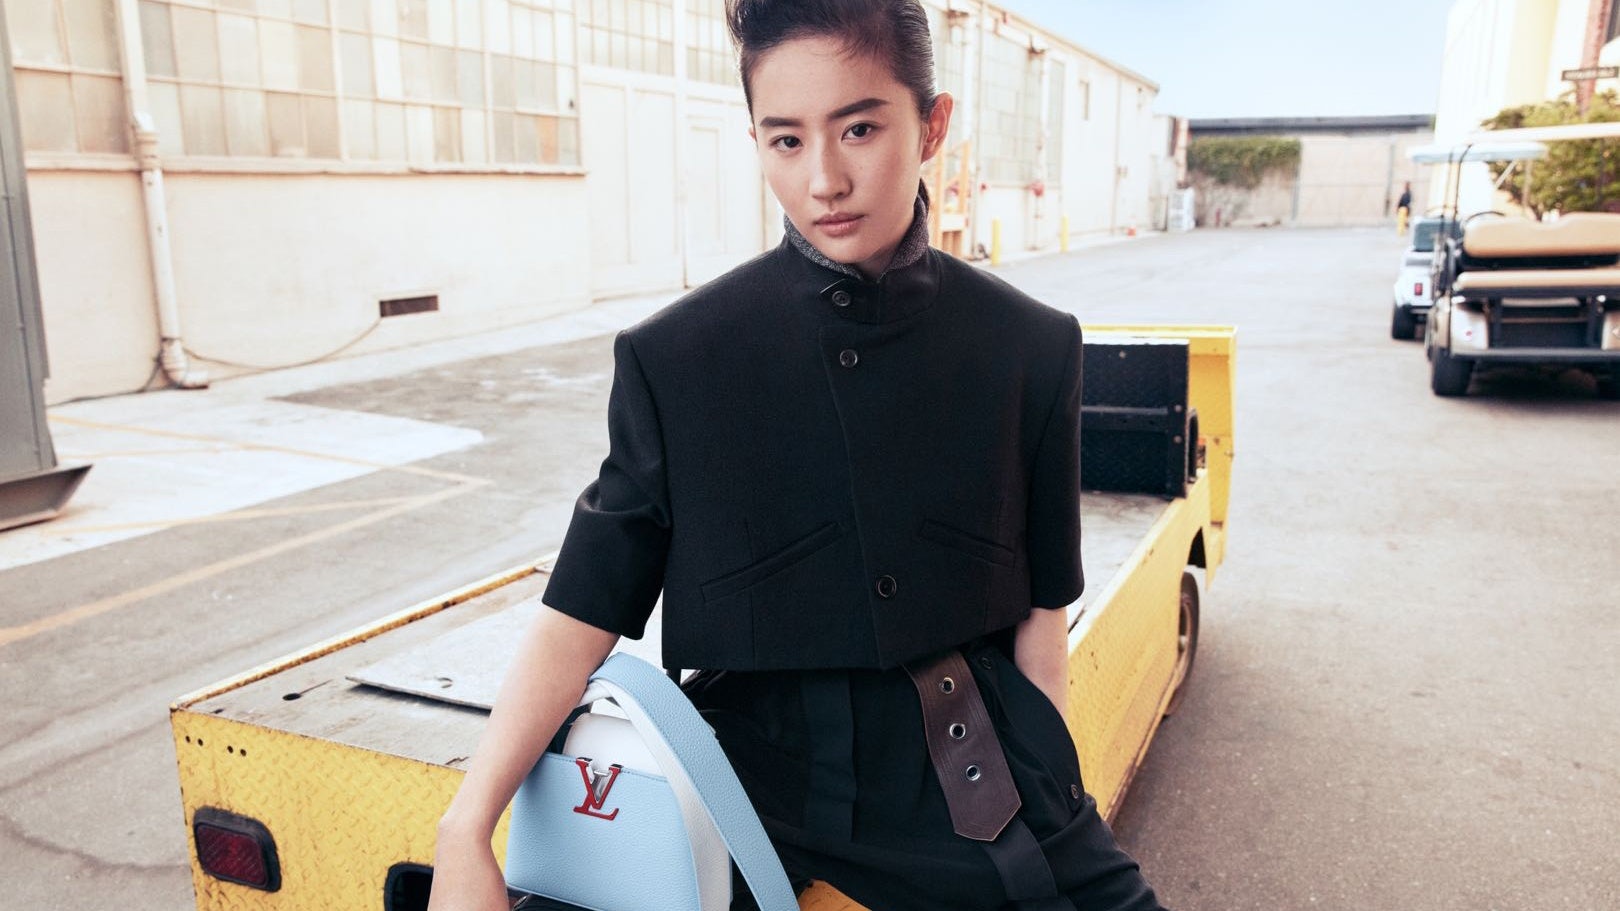 Louis Vuitton chooses the star of the Disney motion picture Mulan, Liu Yifei, as its brand ambassador. How will netizens react?